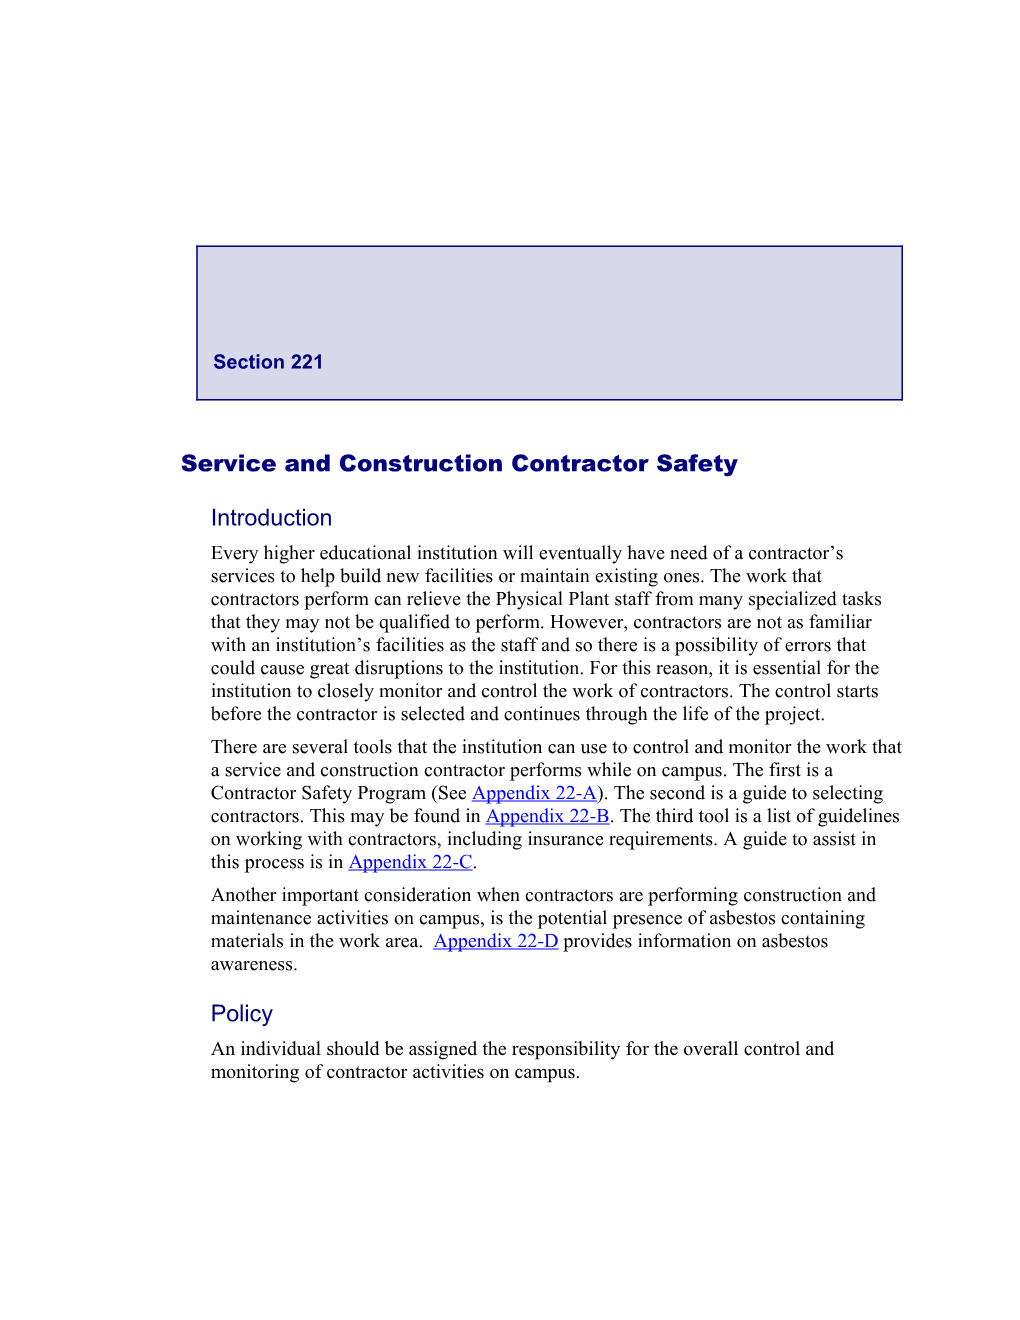 Service and Construction Contractor Safety